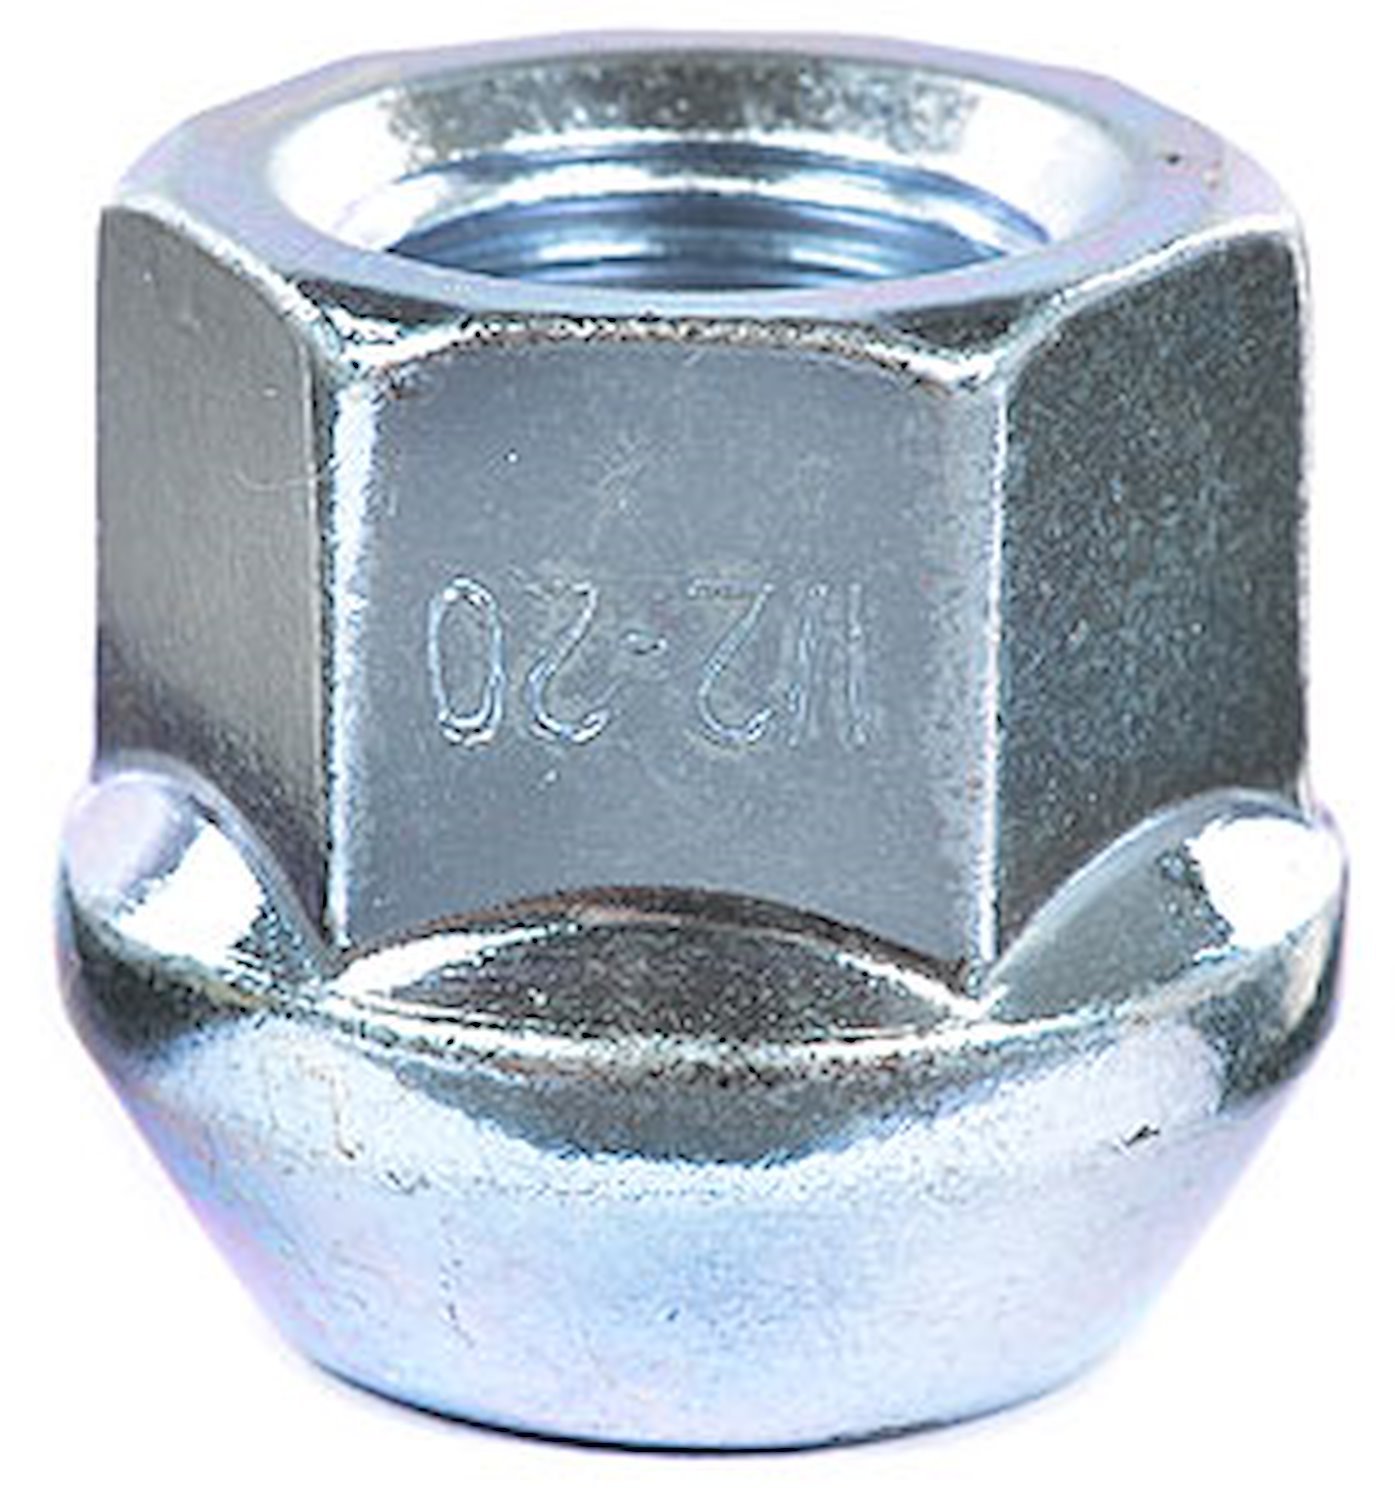 Conical Seat Bulge Lug Nuts 12mm 1.25 60 Degree